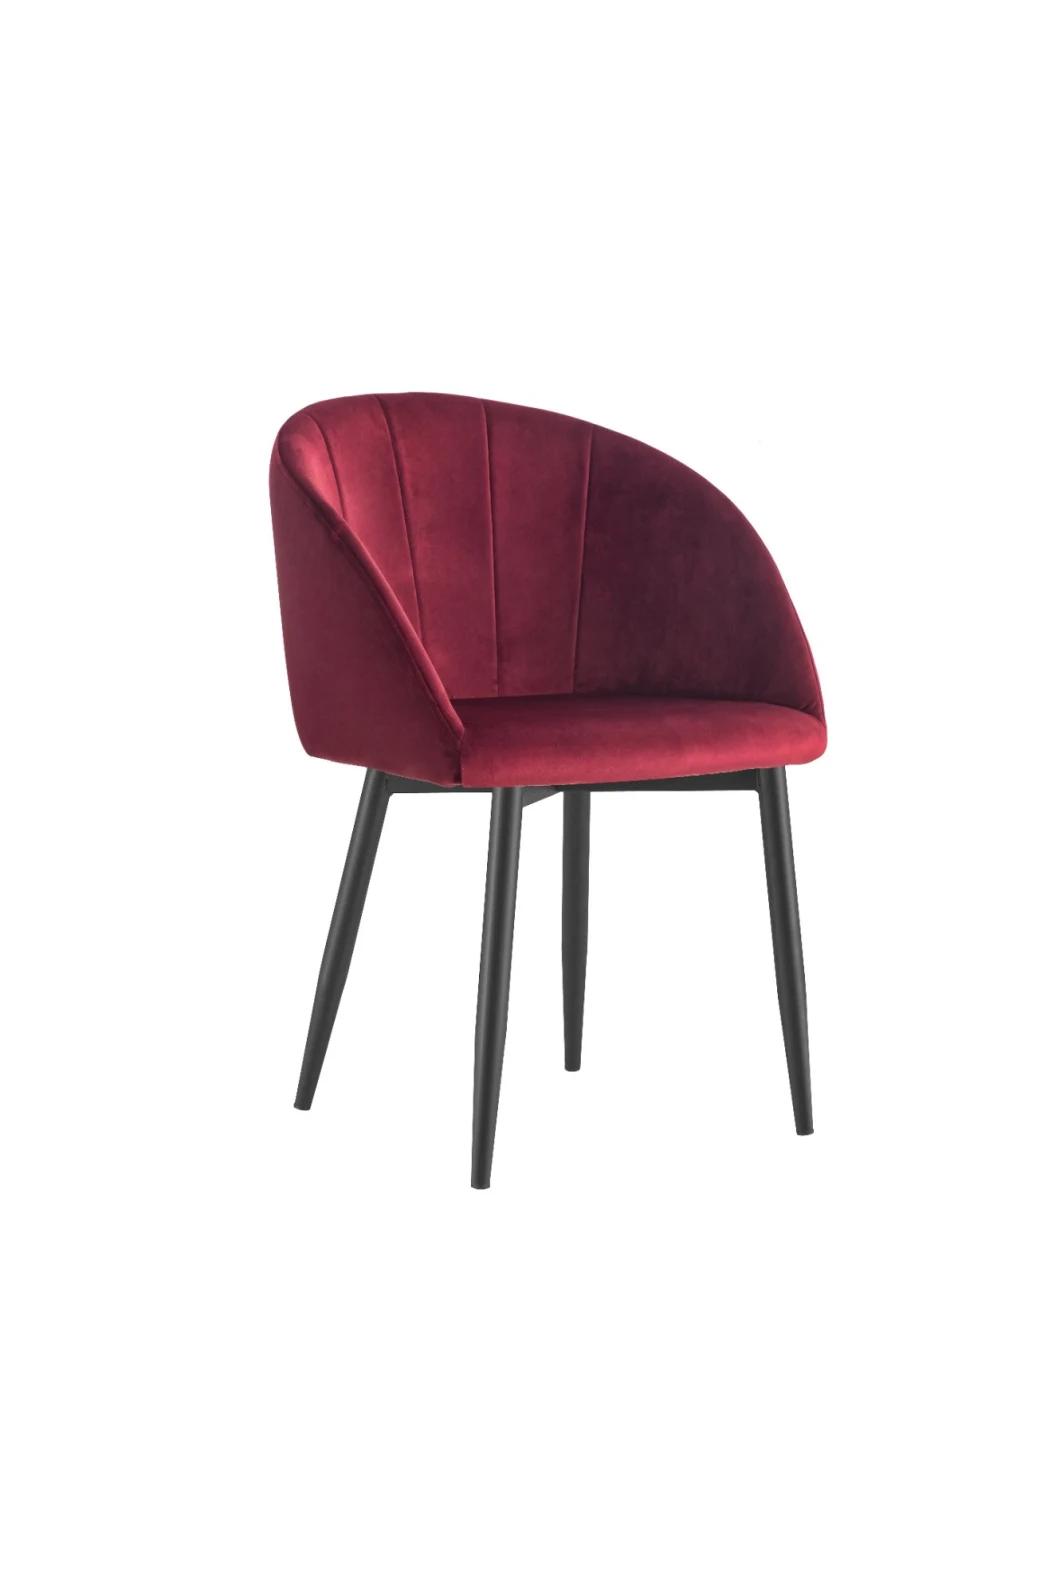 Fashion Wholesale Red Fabric Velvet with Metal Legs Dining Chair Party Chair